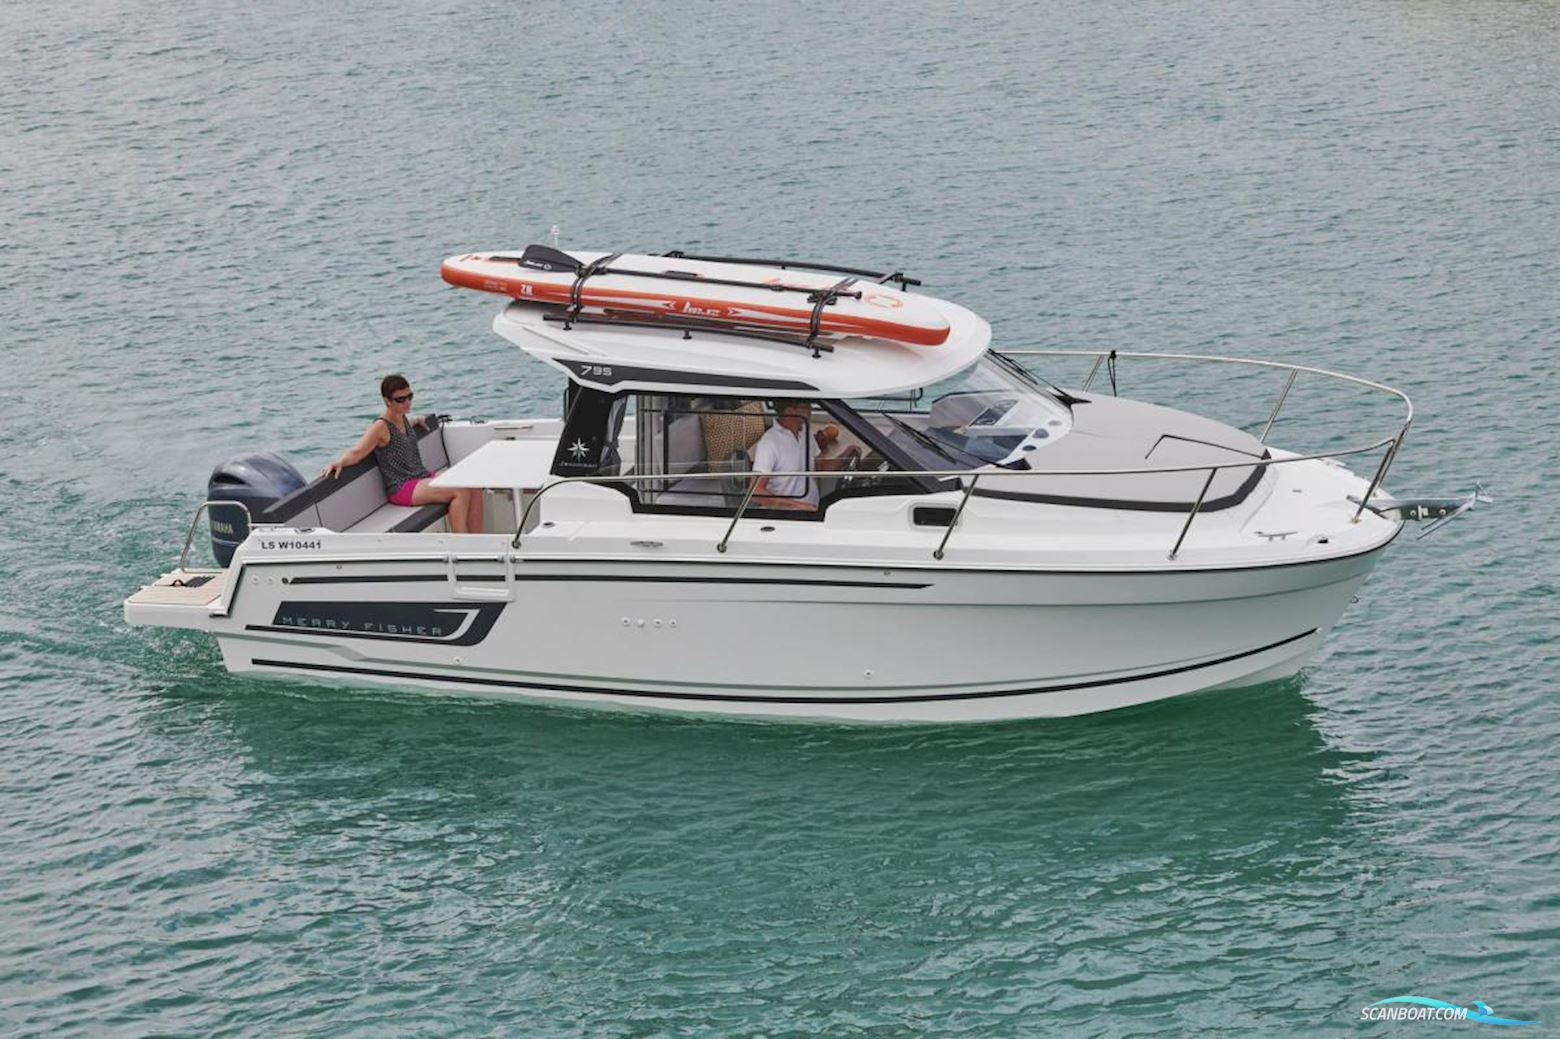 Jeanneau Merry Fisher 795 Serie 2 Motor boat 2023, with Suzuki DF 150 Apx engine, The Netherlands